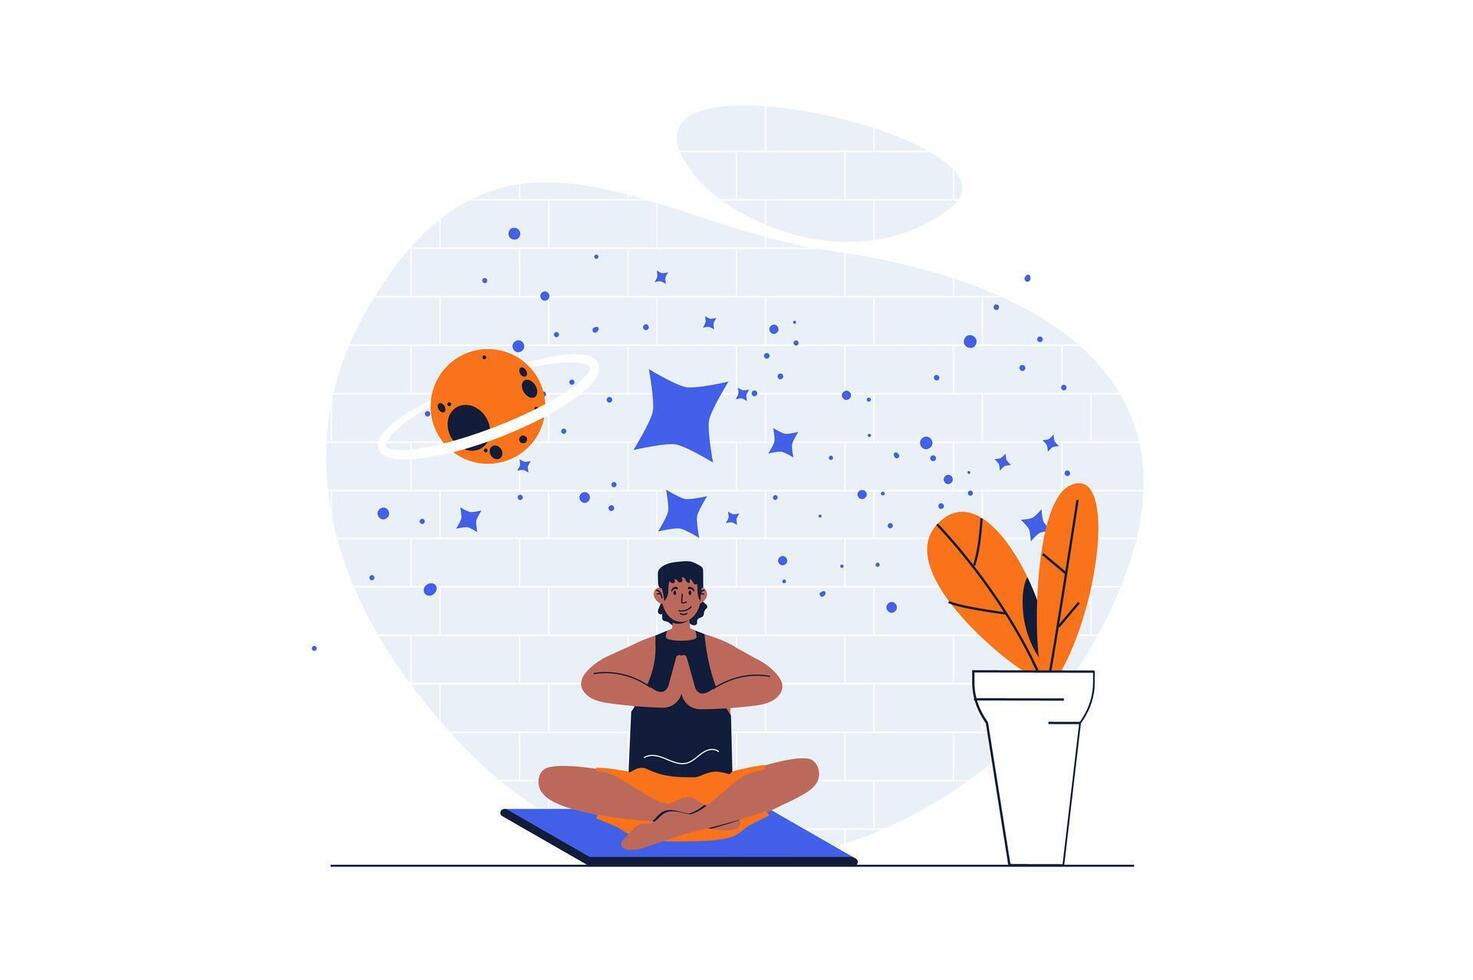 Yoga asanas concept with character scene. Man sitting in lotus pose, breathing and meditation mindfulness. People situation in flat design. Vector illustration for social media marketing material.